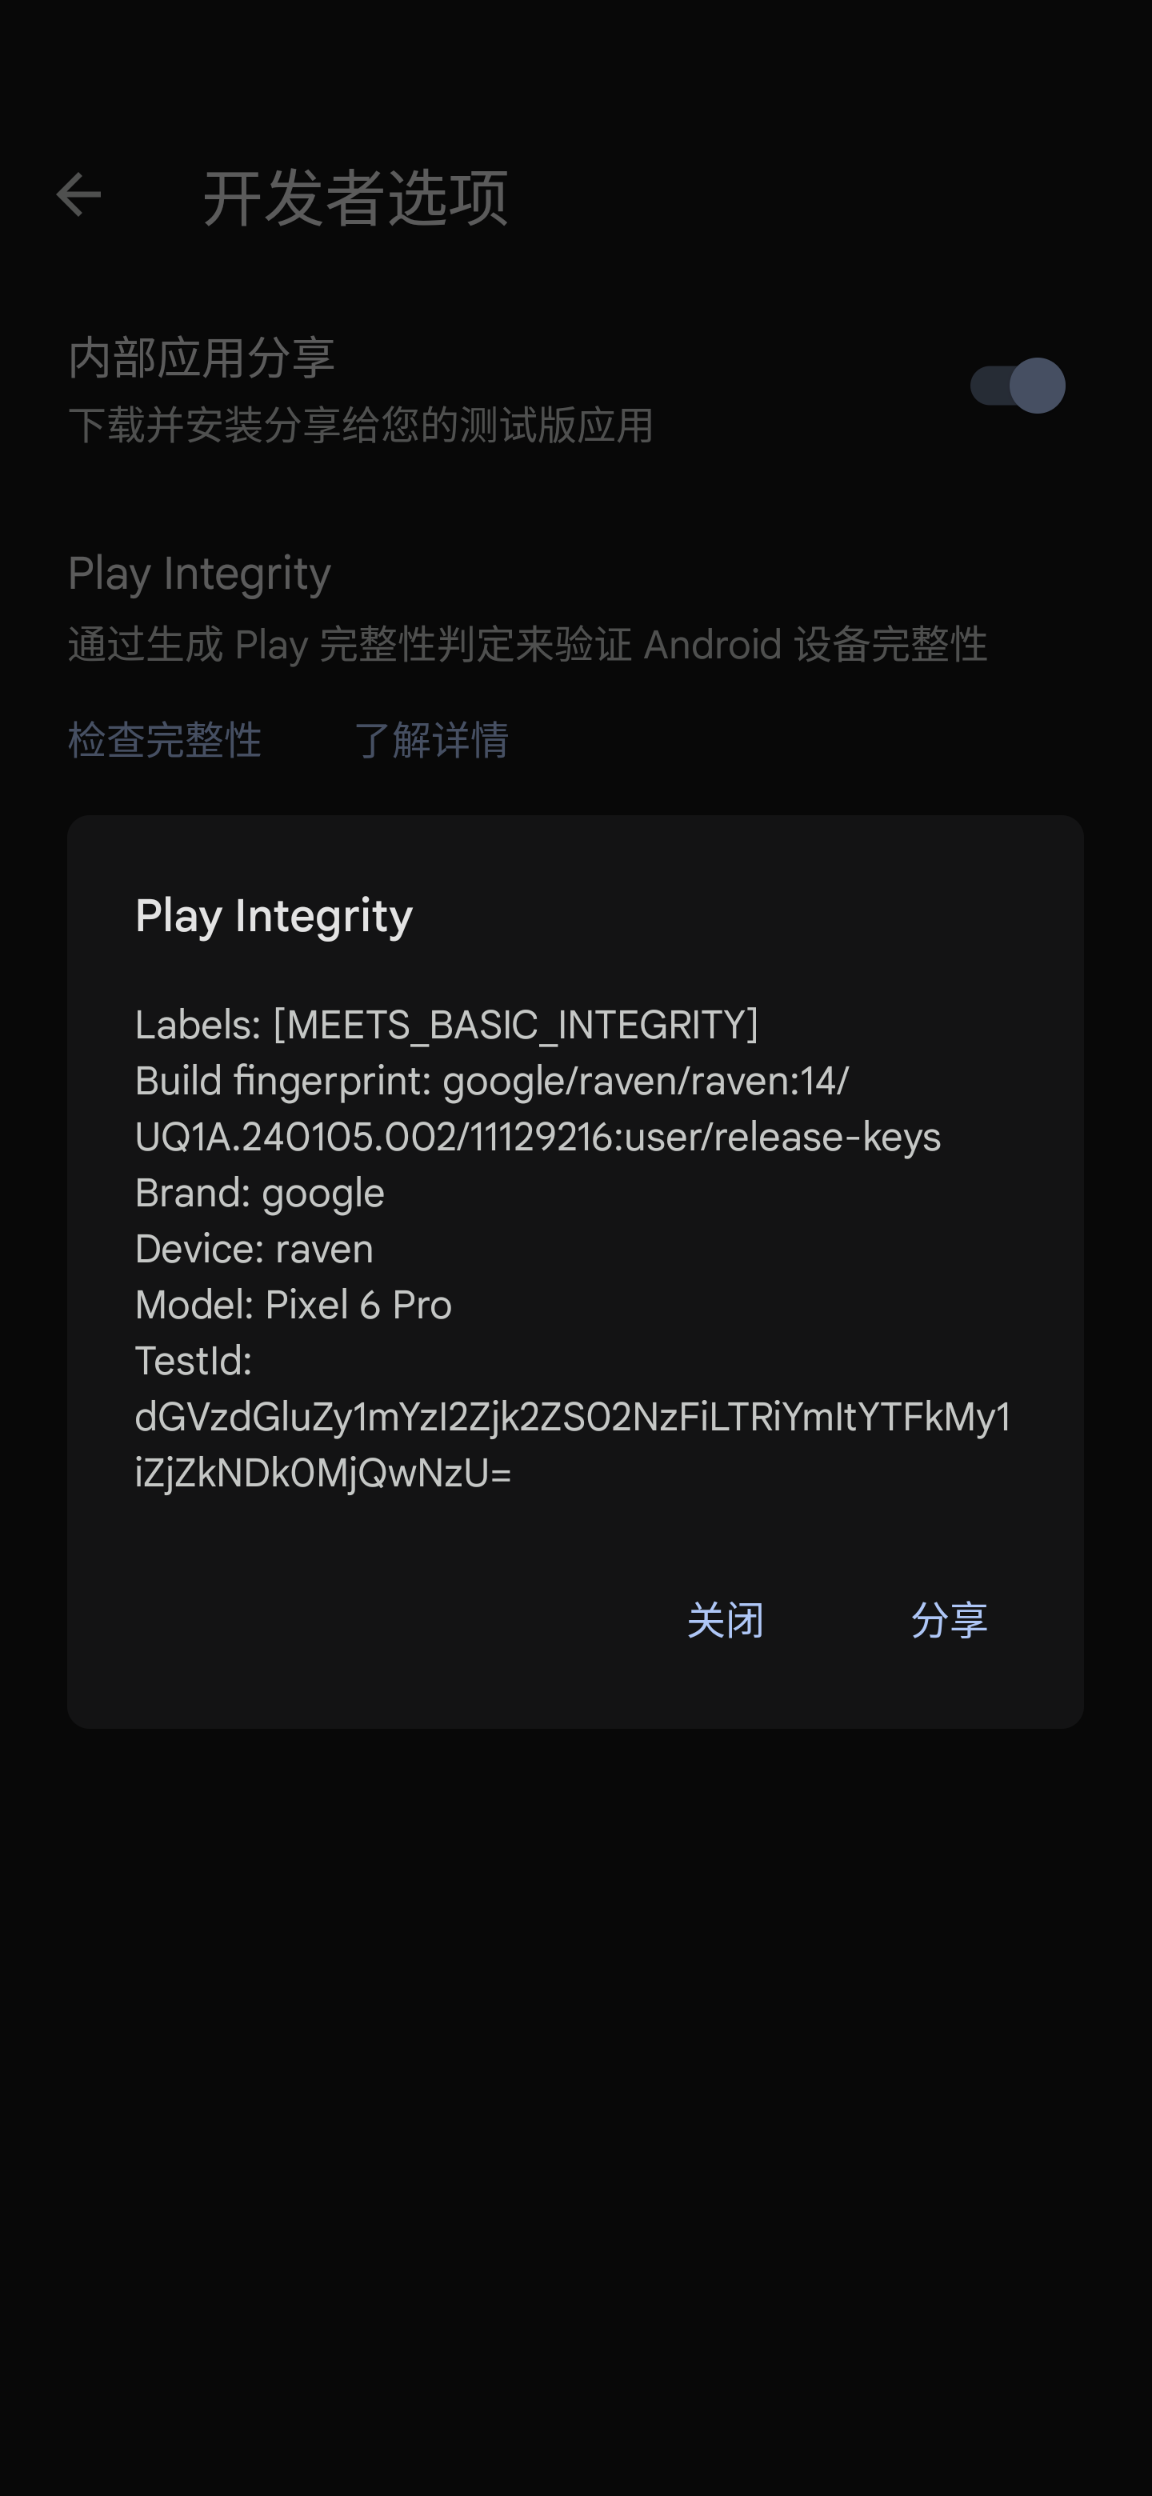 Play Integrity